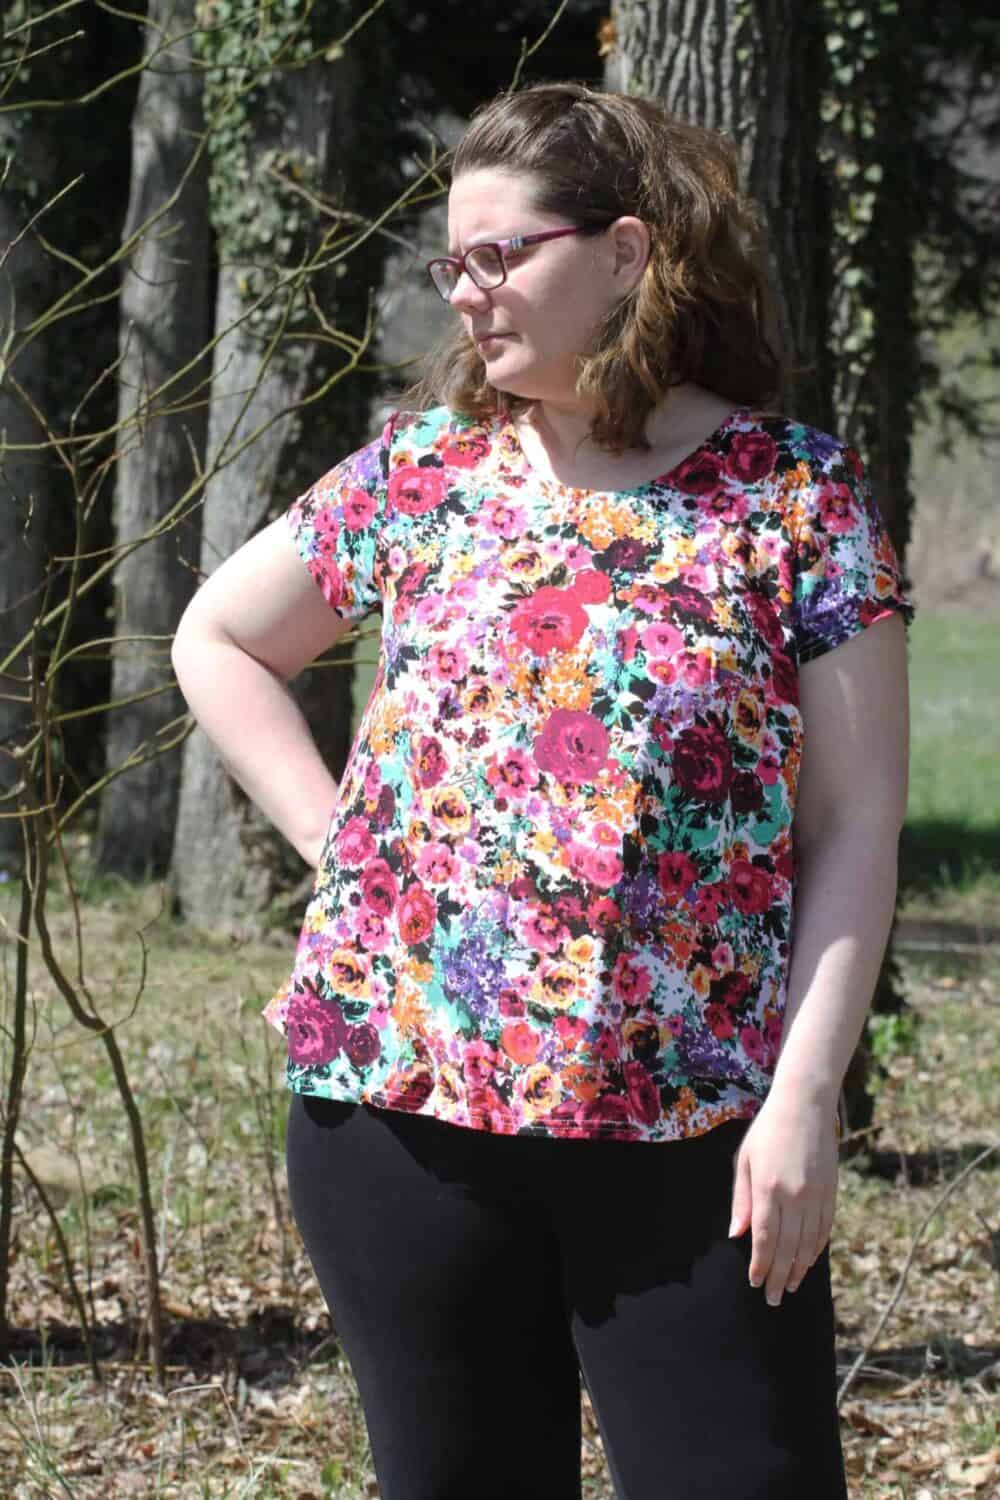 Easy woven blouse sewing pattern by Love Notions.